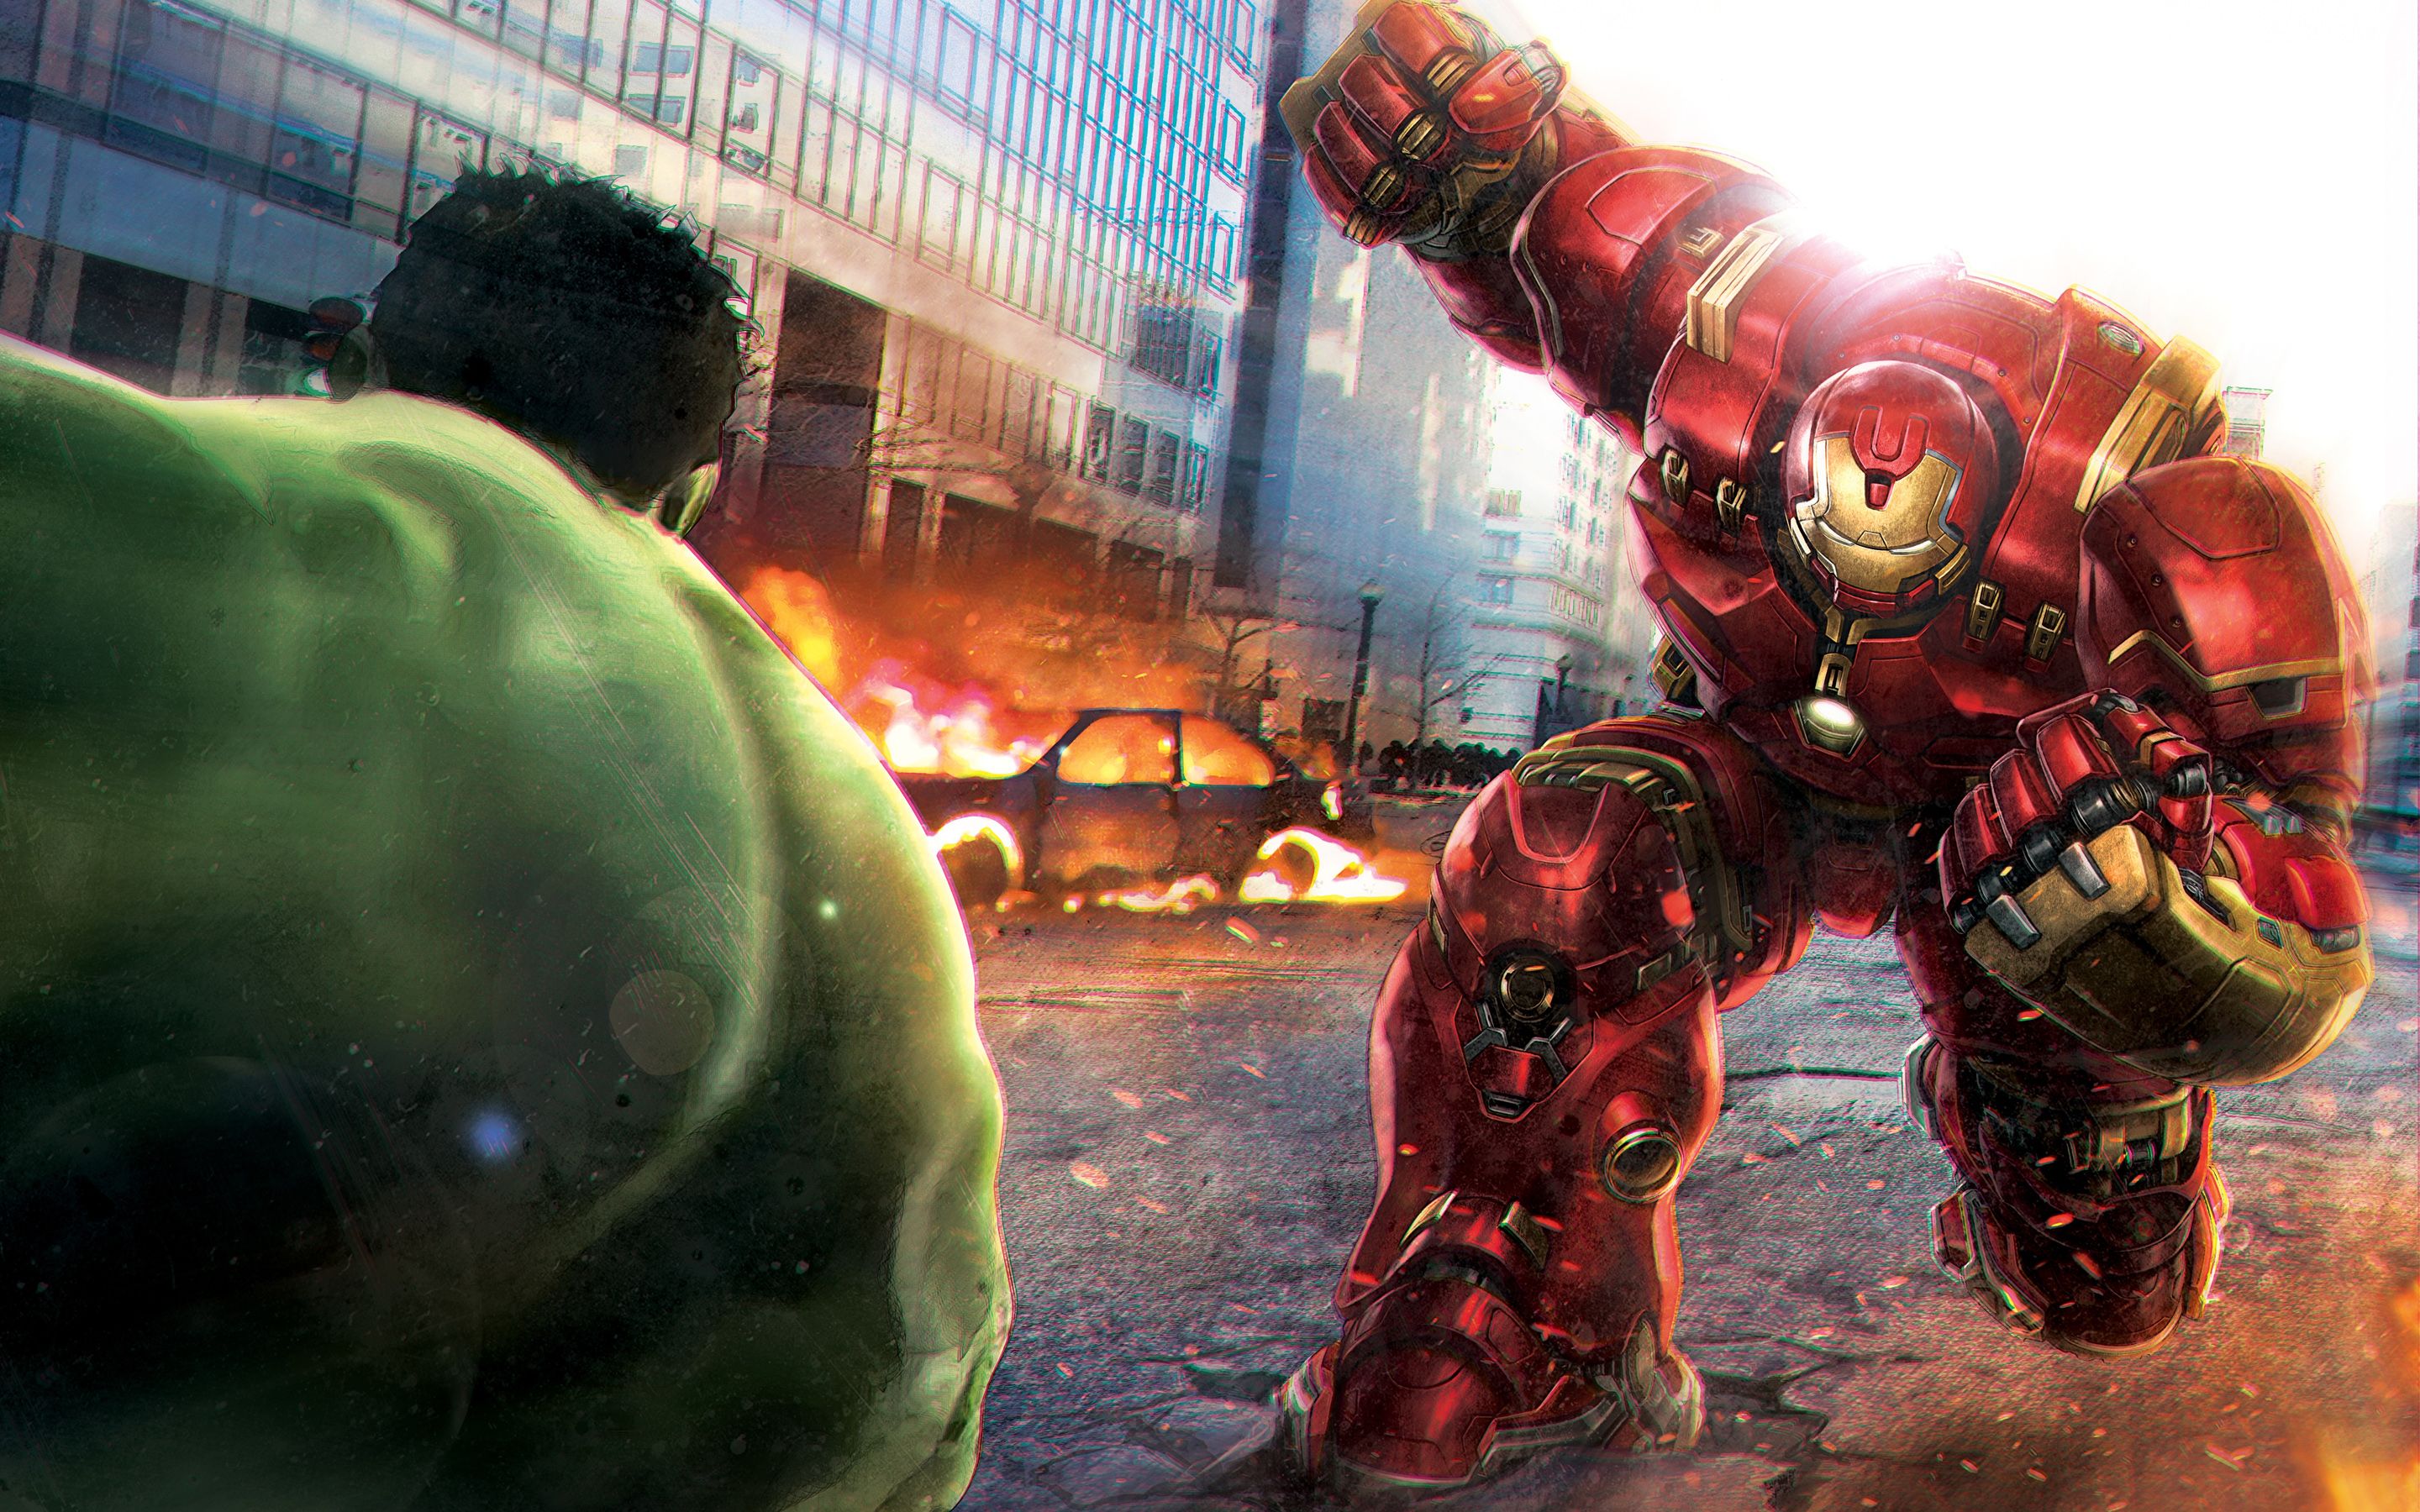 Hulkbuster 4K wallpaper for your desktop or mobile screen free and easy to download